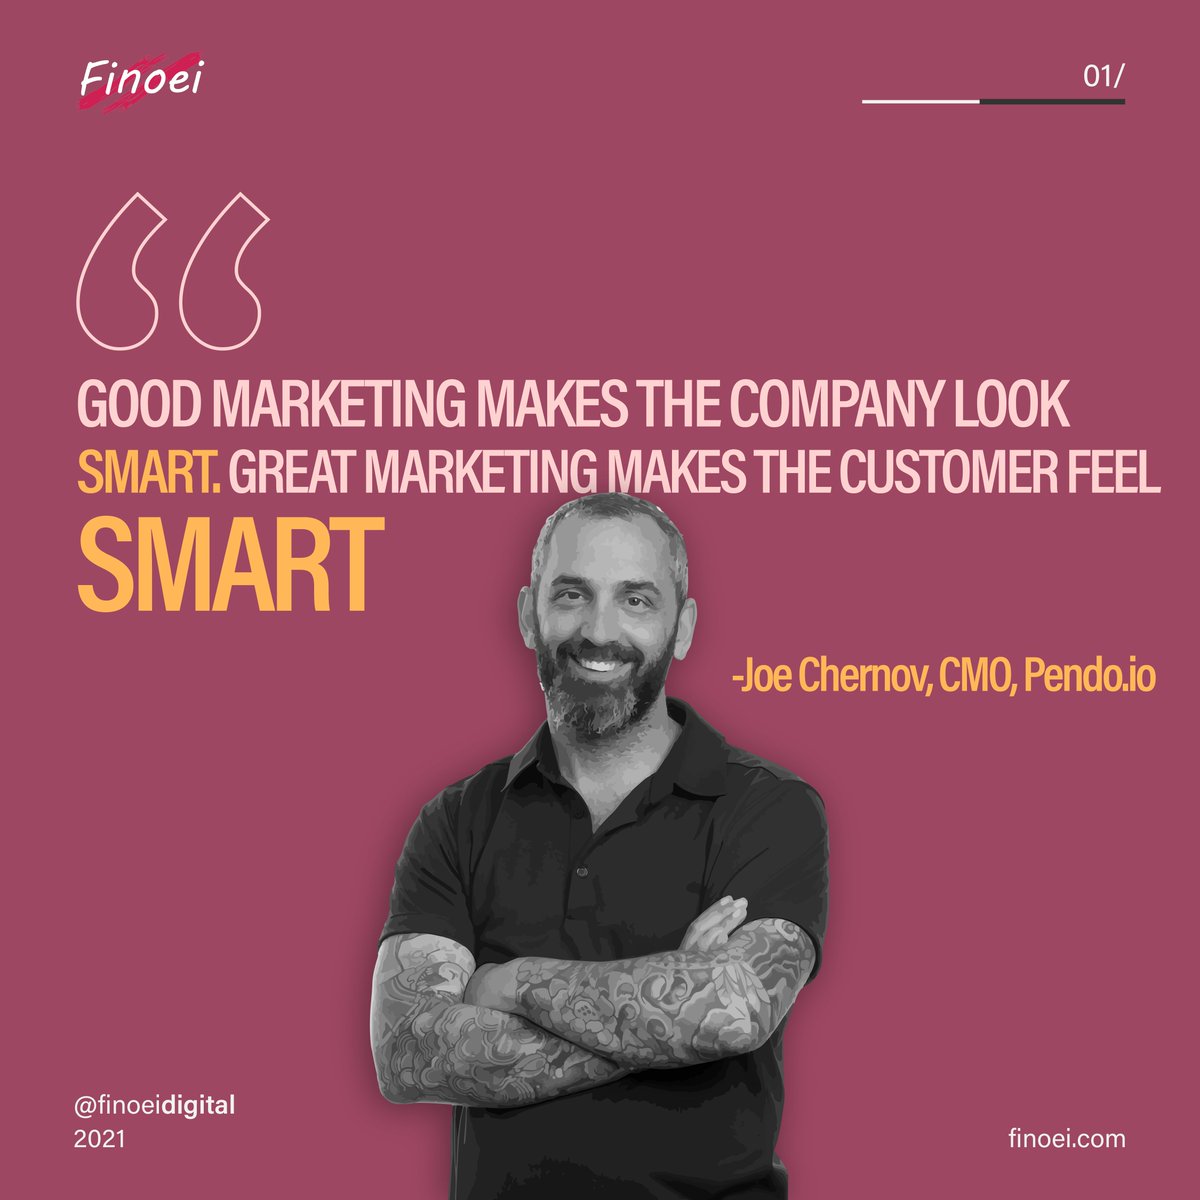 Rightly said💯

Let us know your thoughts about this in the comments!

#marketing #marketingquote  #digitalmarketing #digitalmarketingservice #finoei